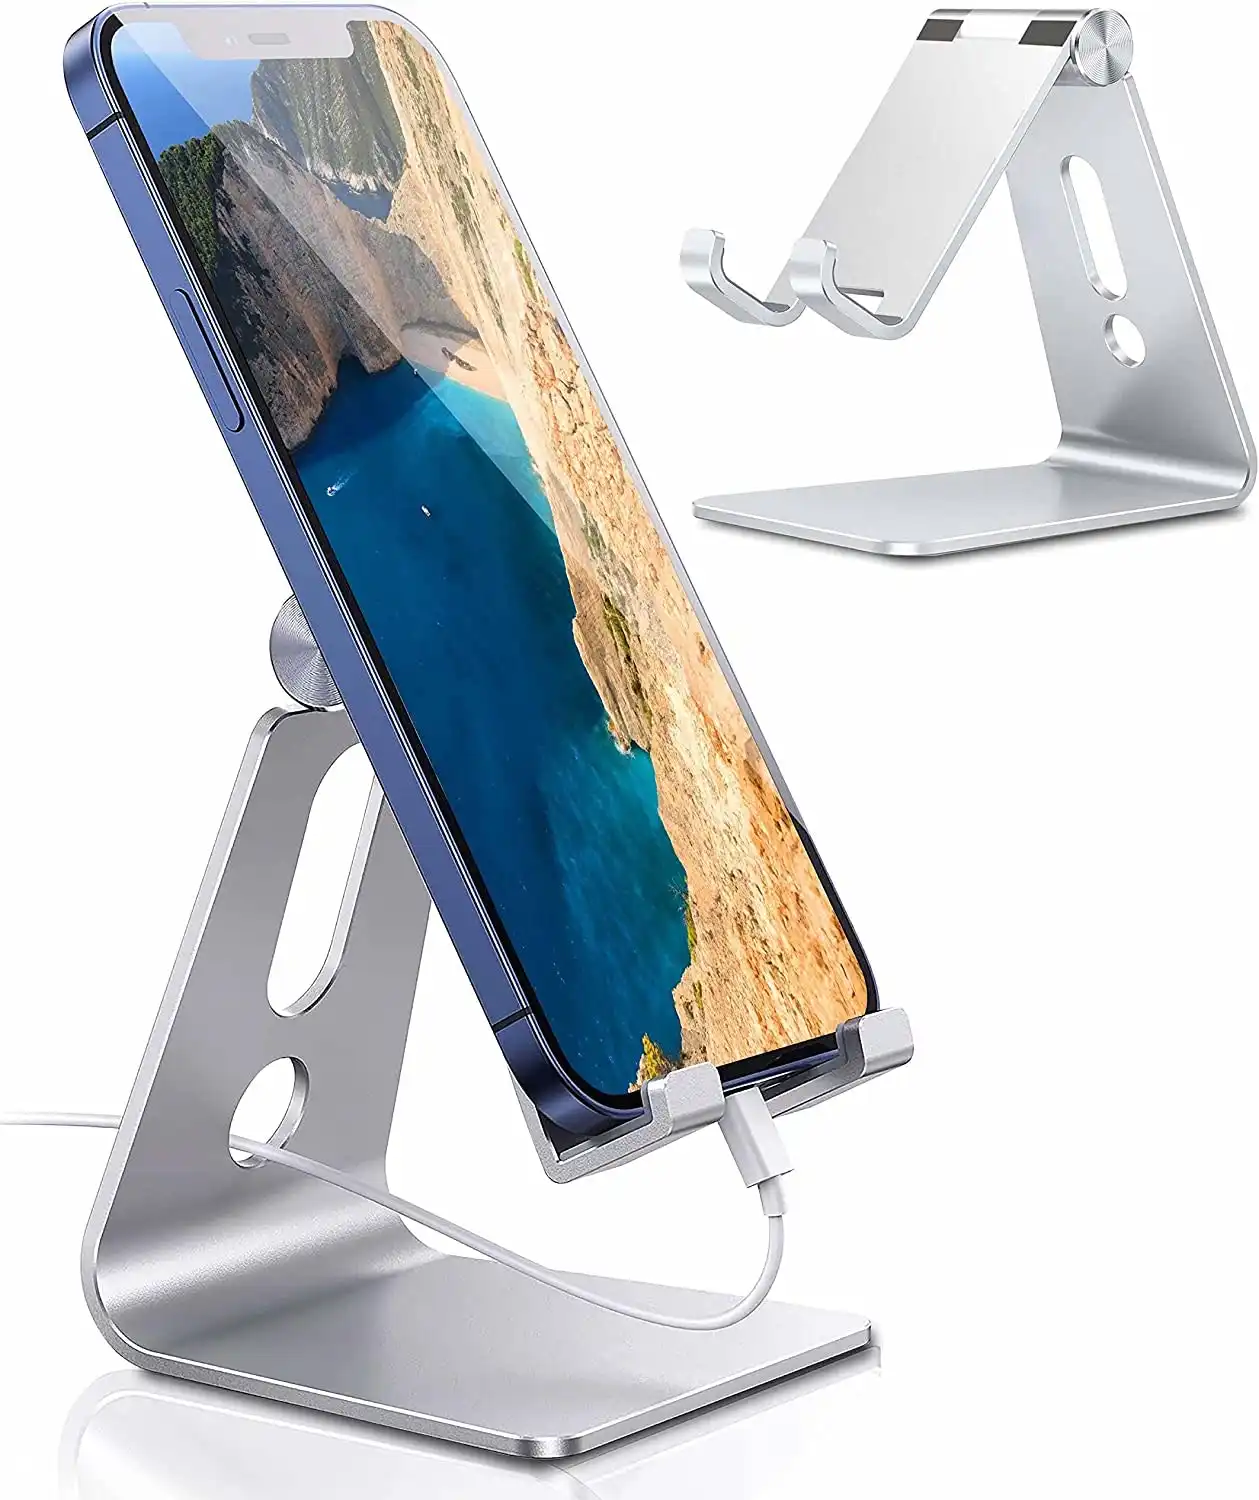 Universal Desktop Stand for Cell Phones